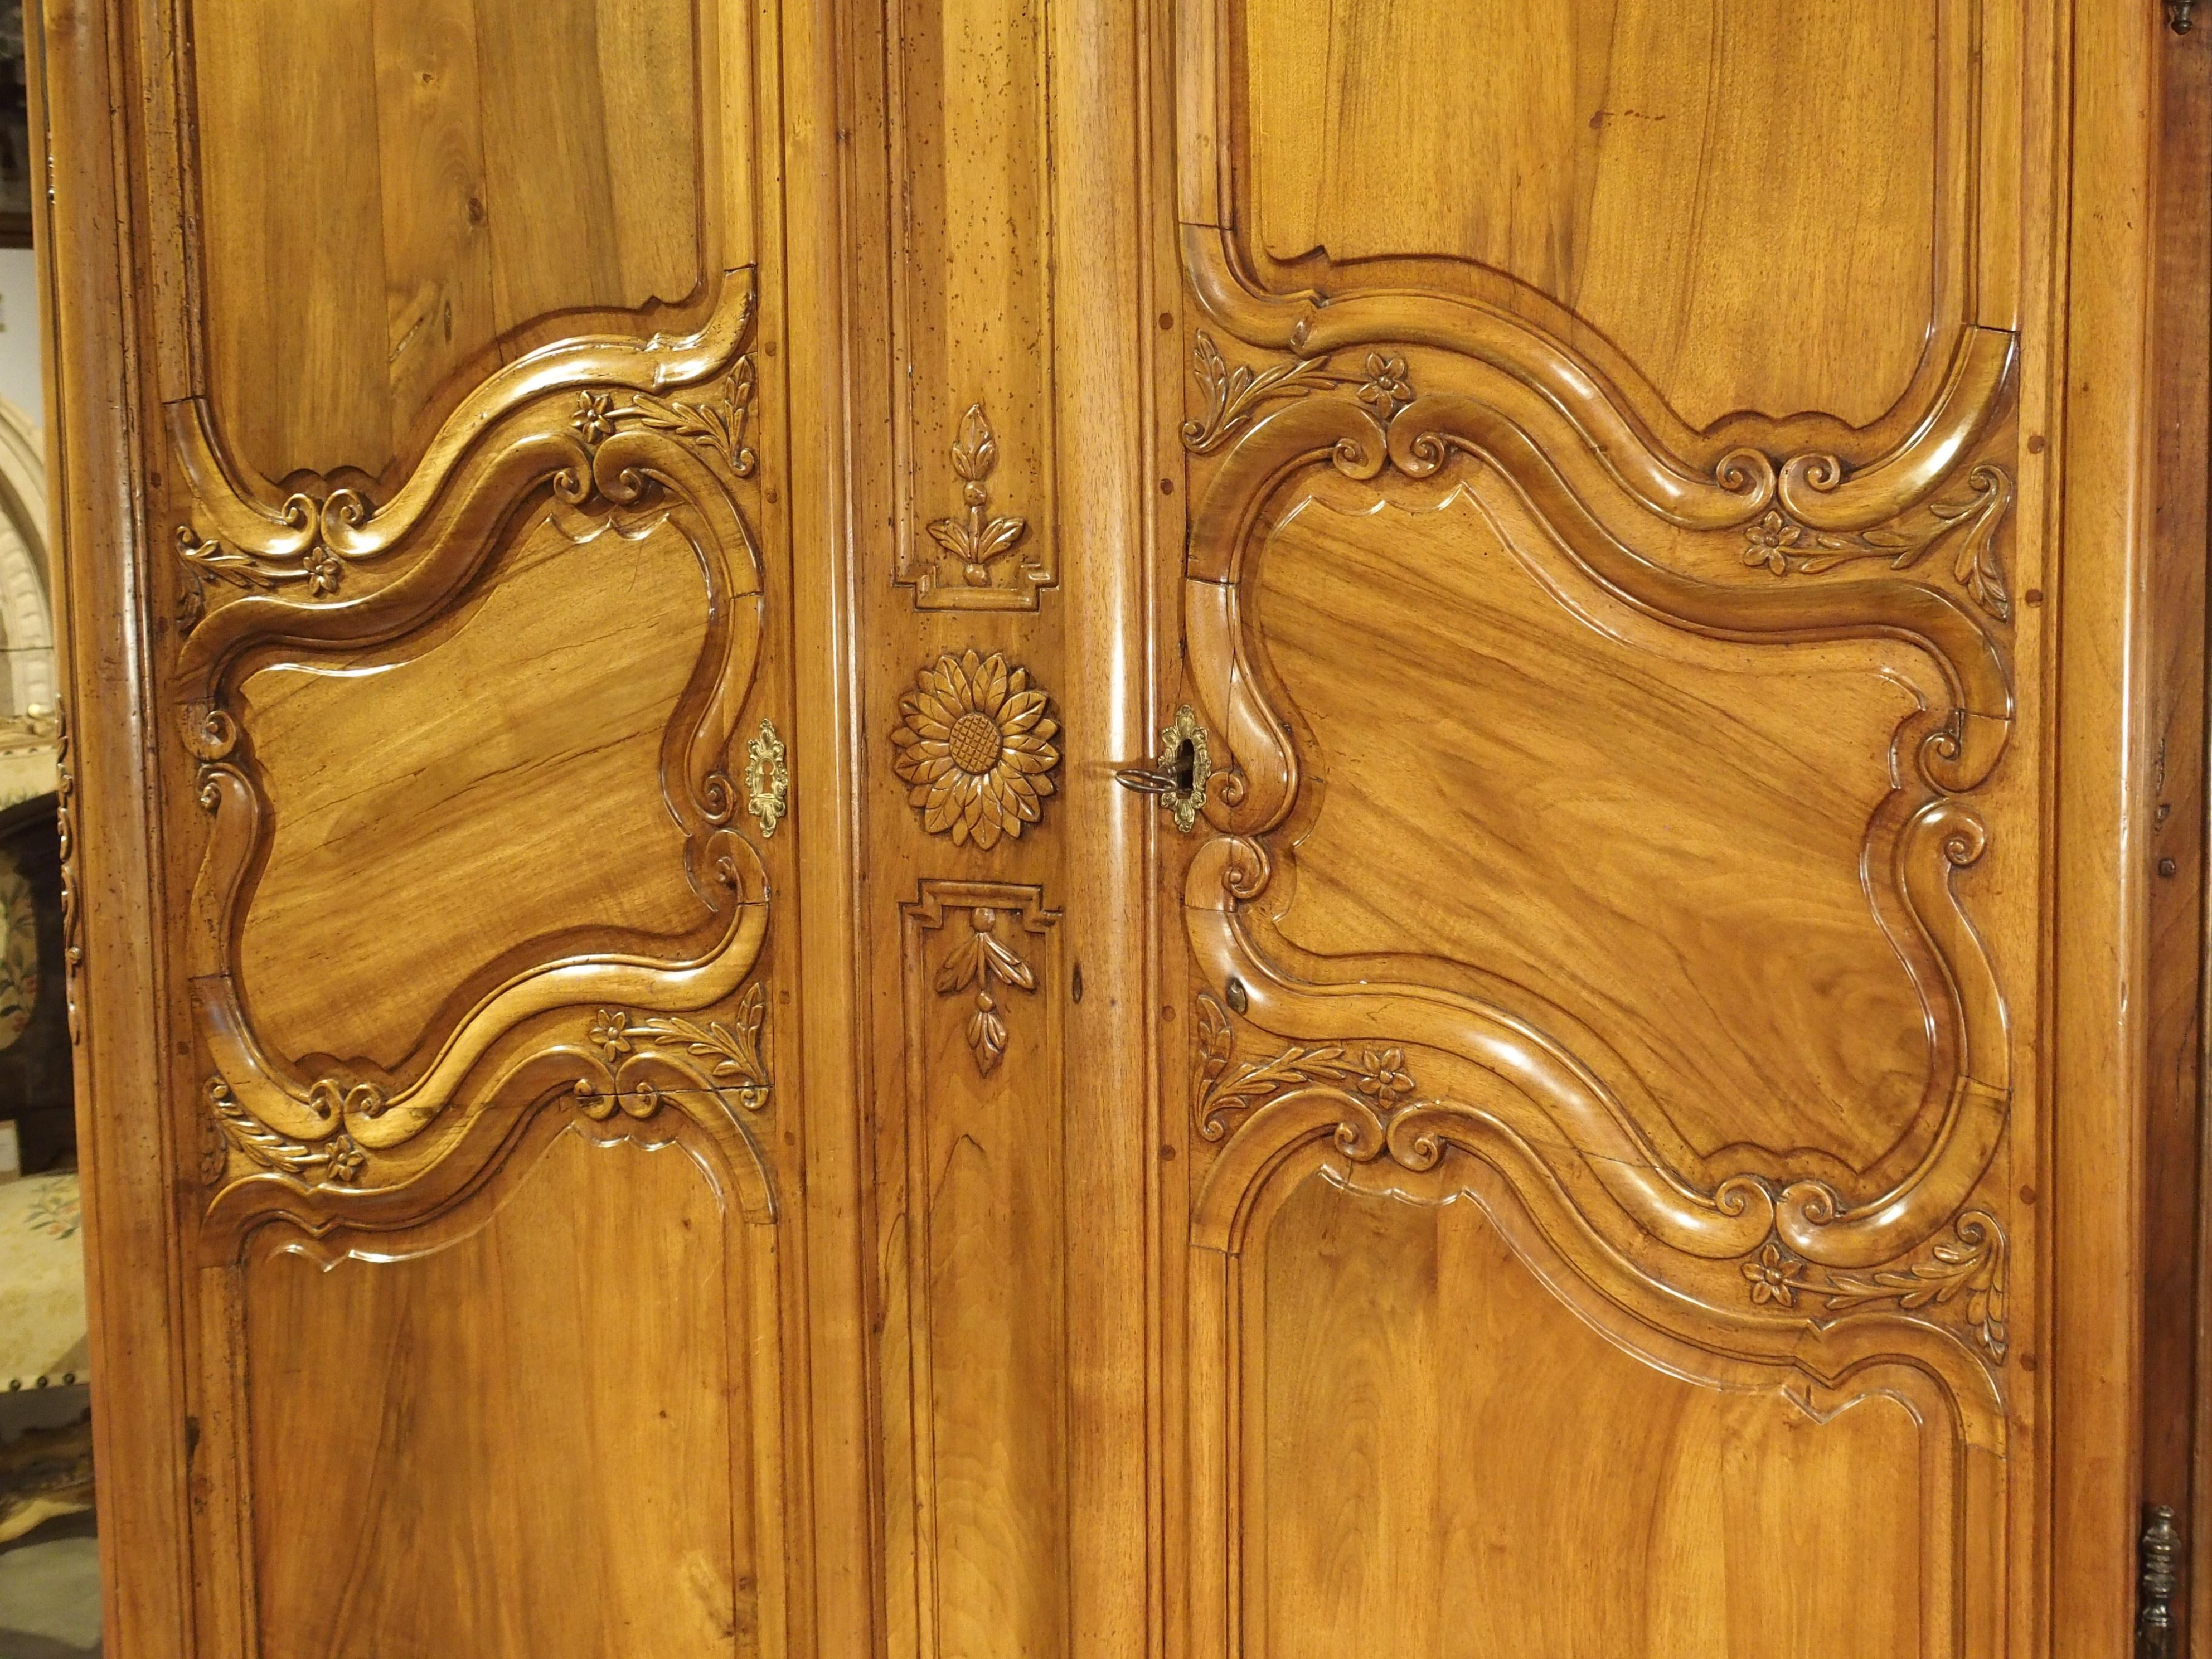 Louis XV 18th Century Walnut Wood Armoire from the Rhone Valley